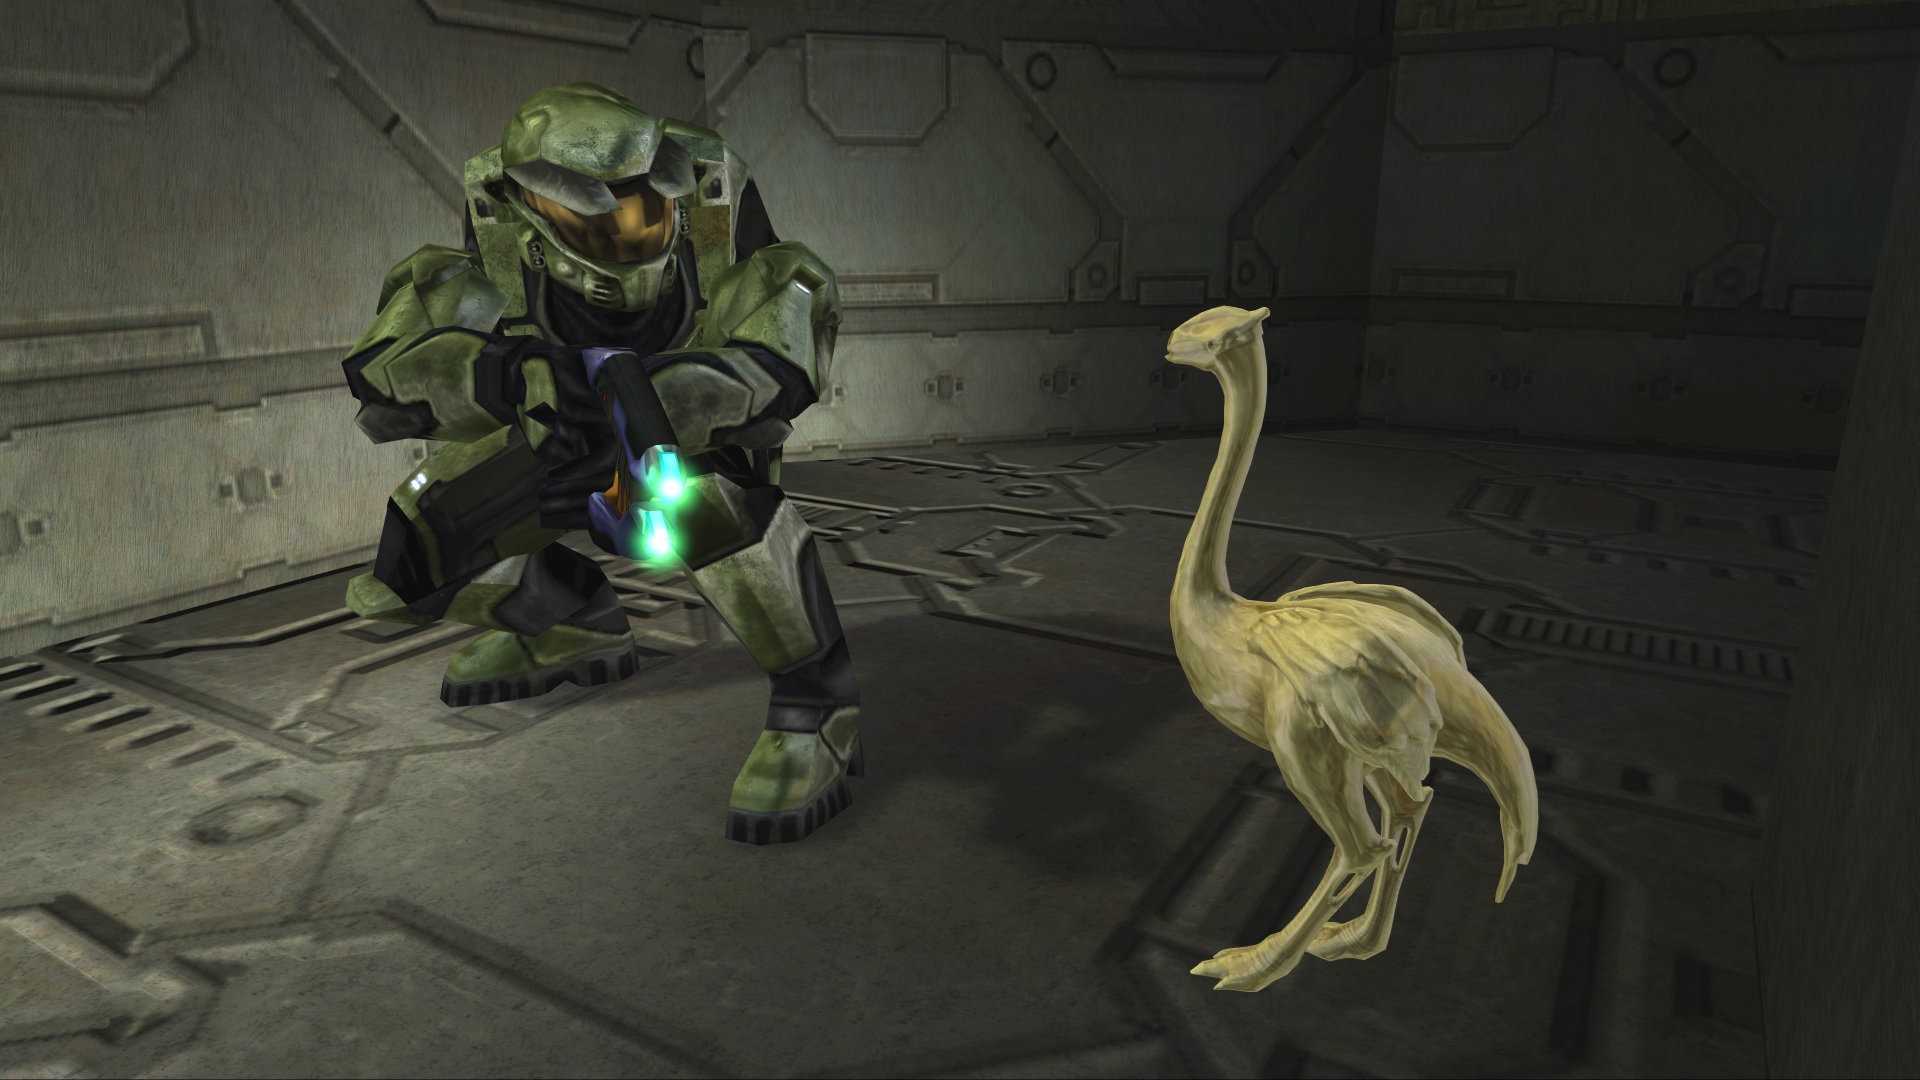 MCC December Update header image showing Halo: CE Master Chief crouching by a moa statue